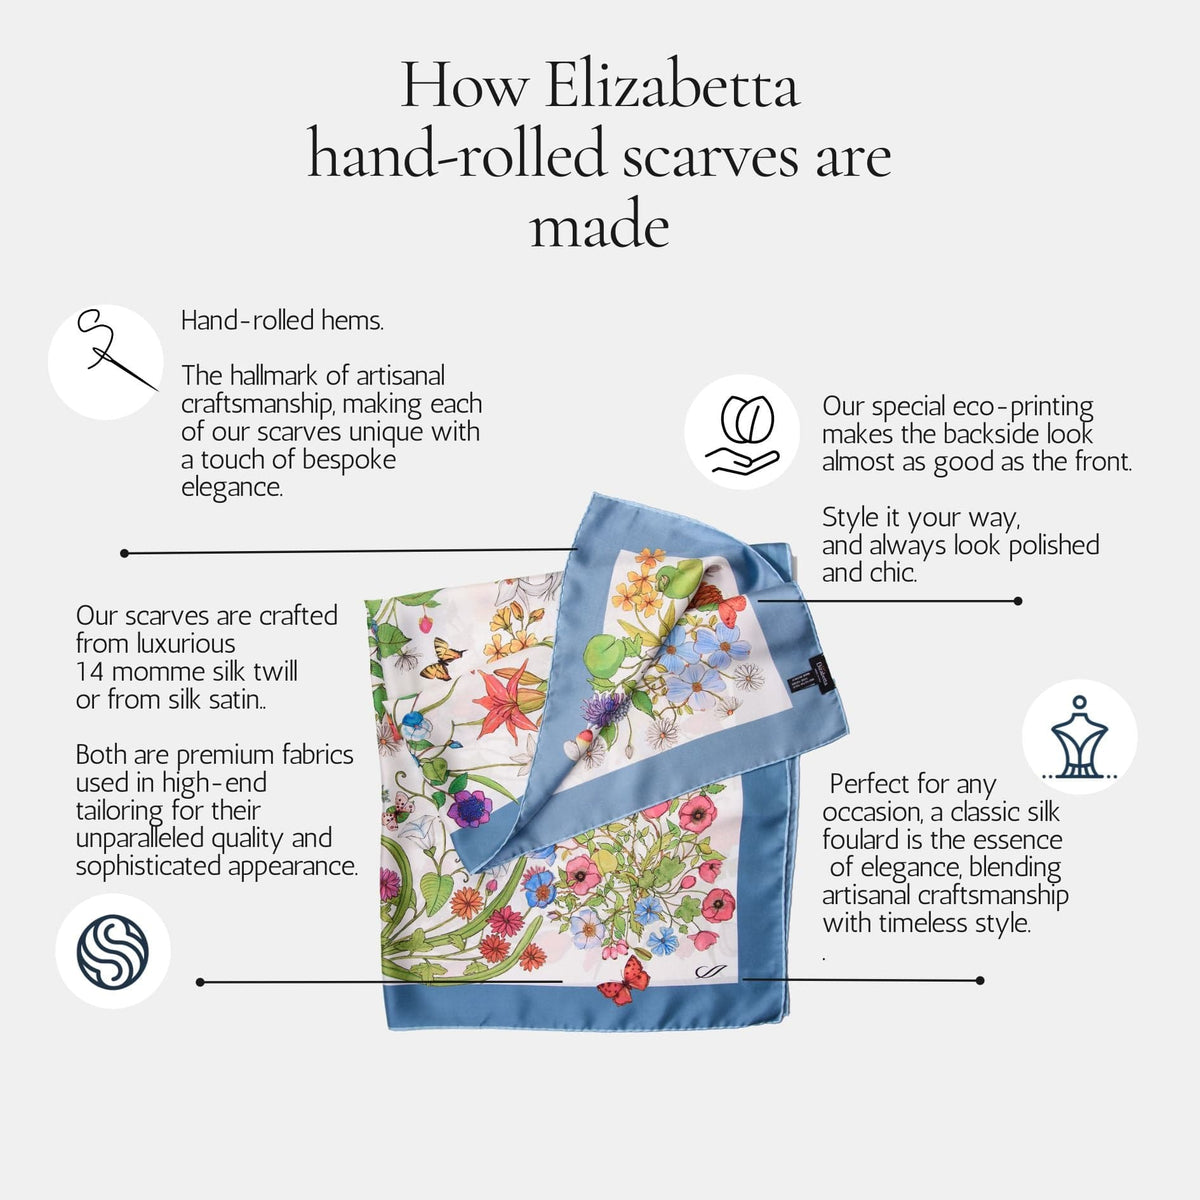 How Elizebatta handrolled scarves are made